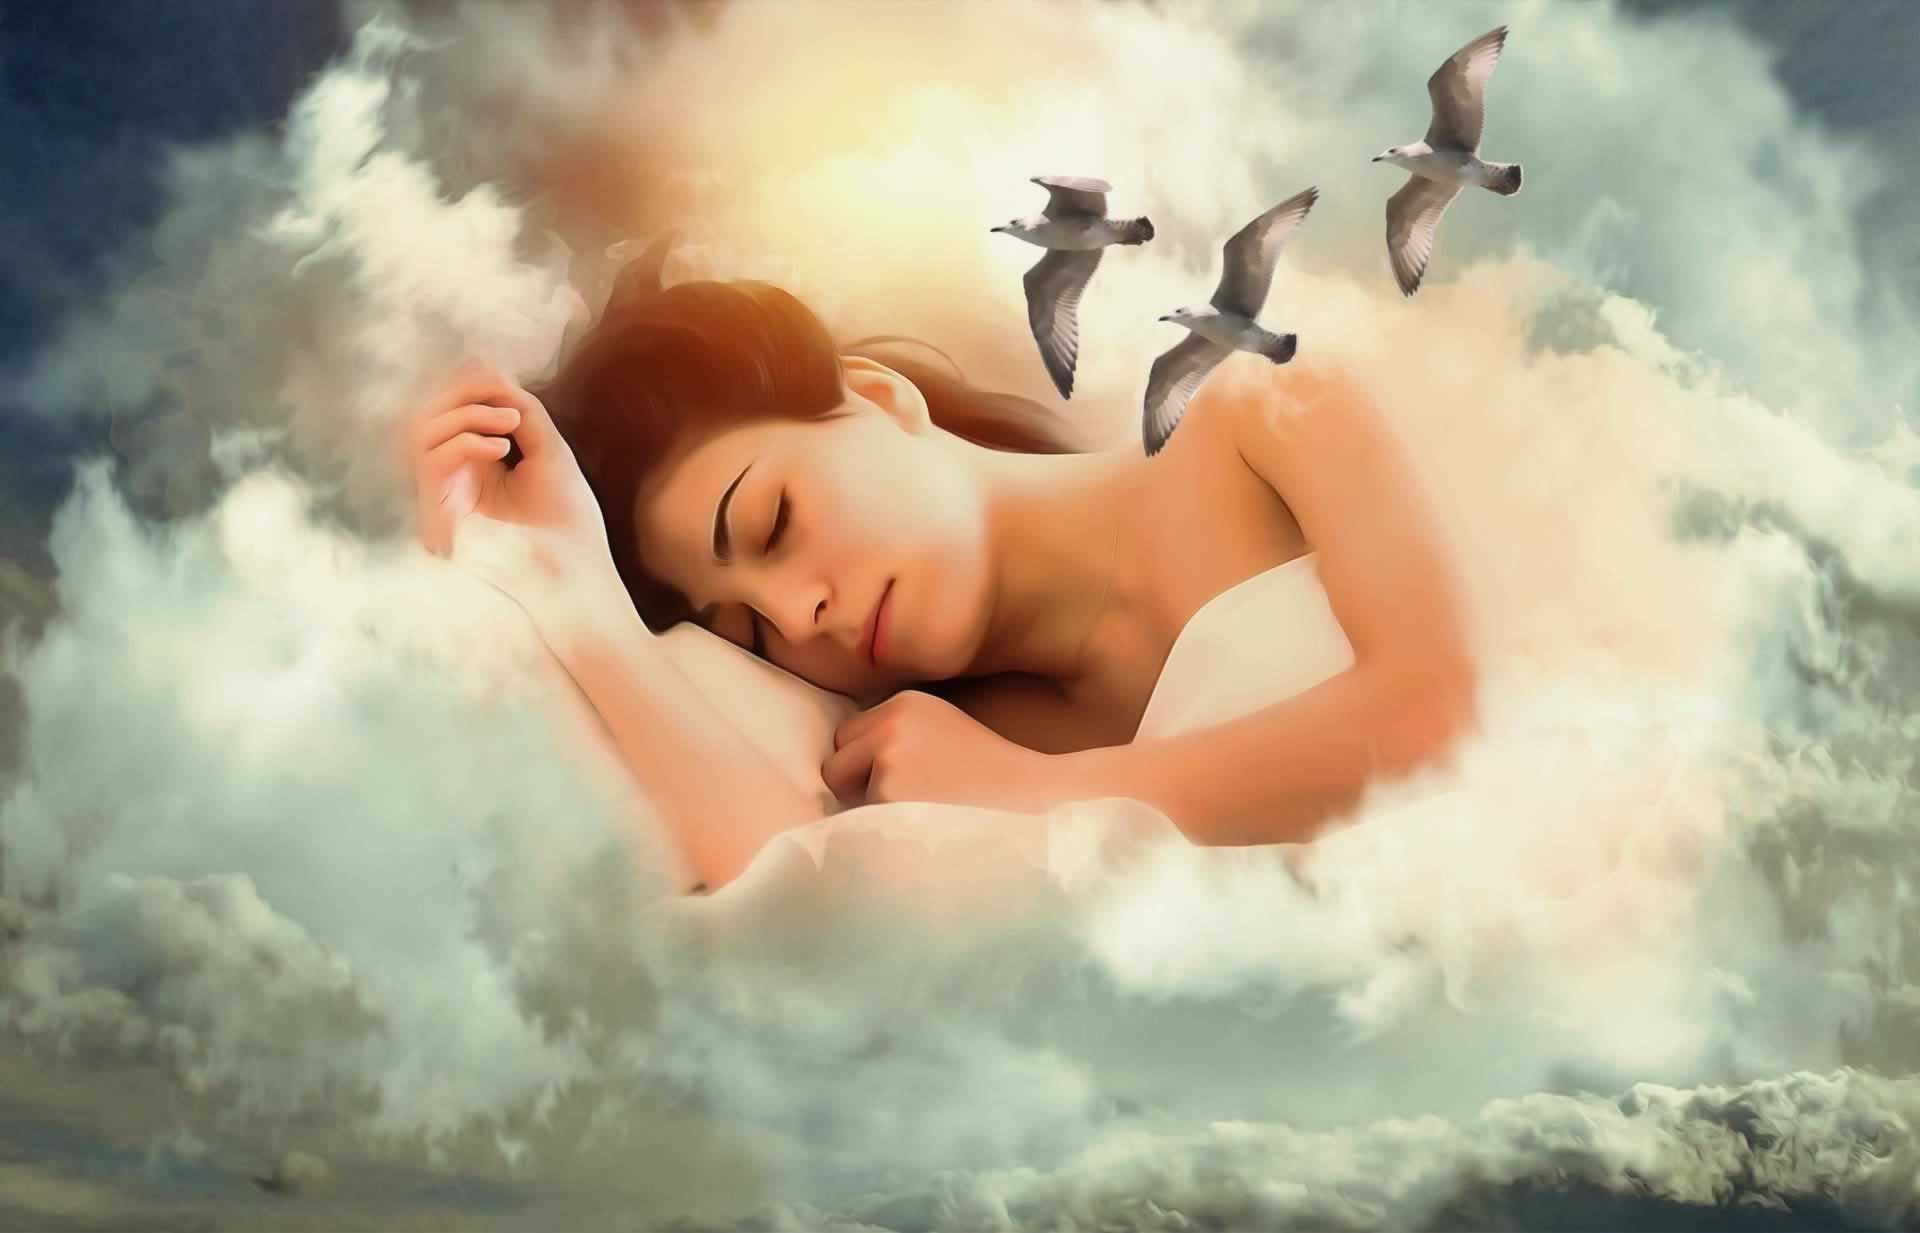 Learn how to receive signs from your angel in dreams